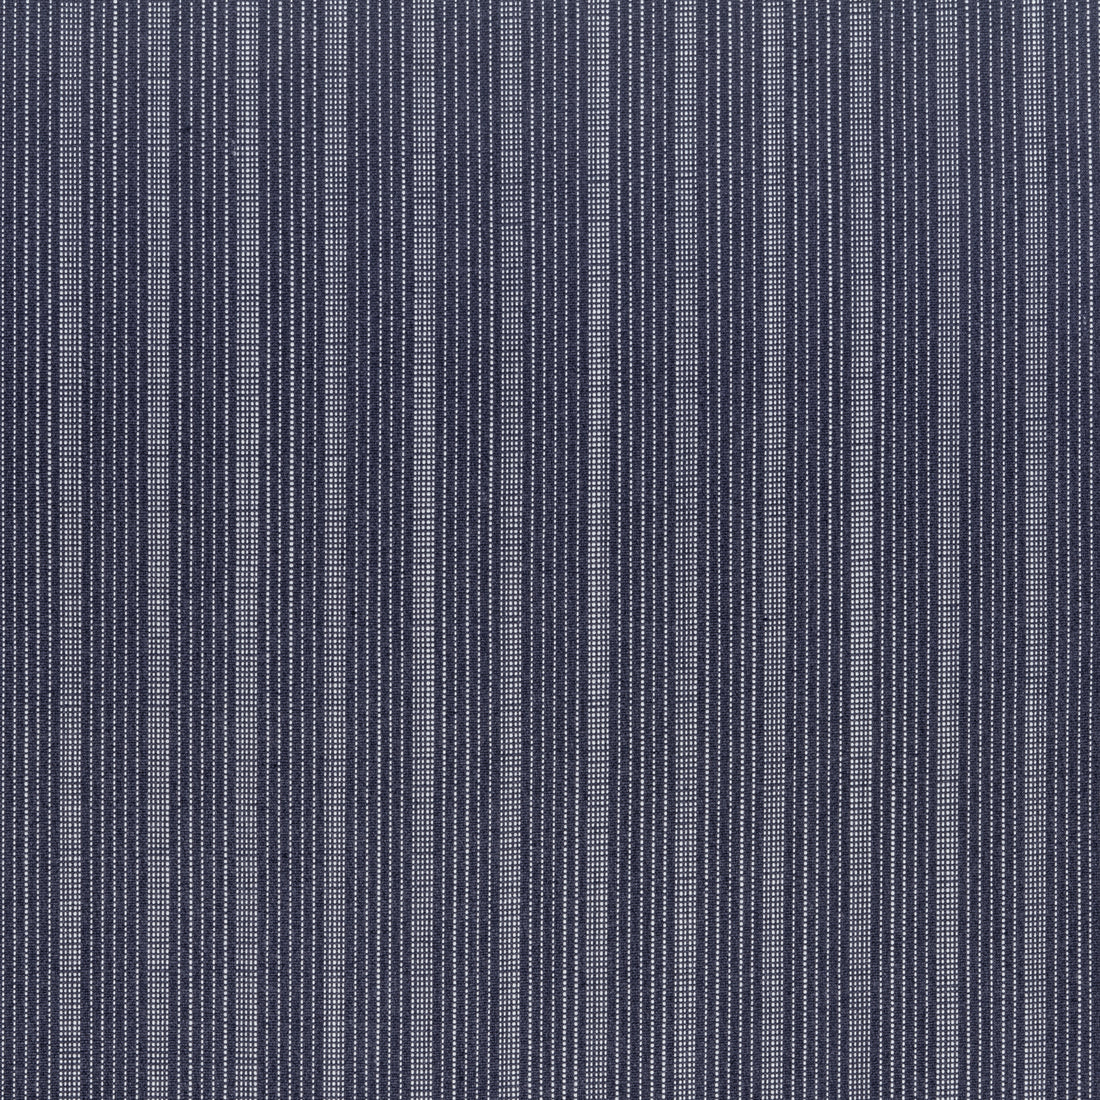 Ebro Stripe fabric in navy color - pattern number W8511 - by Thibaut in the Villa collection